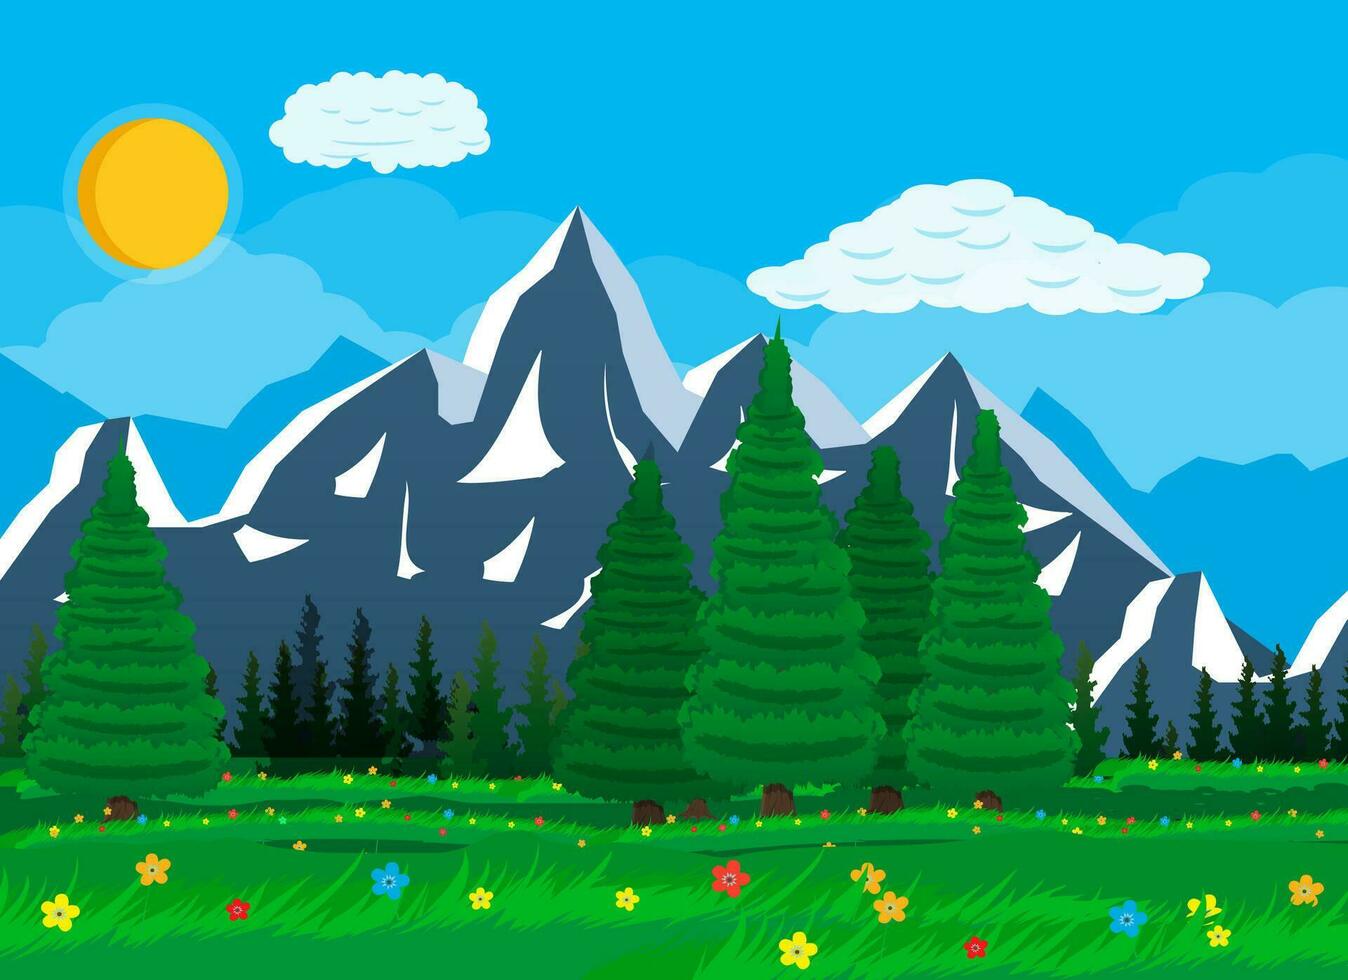 Summer nature landscape with mountains, forest, grass, flower, sky, sun and clouds. National park. Vector illustration in flat style